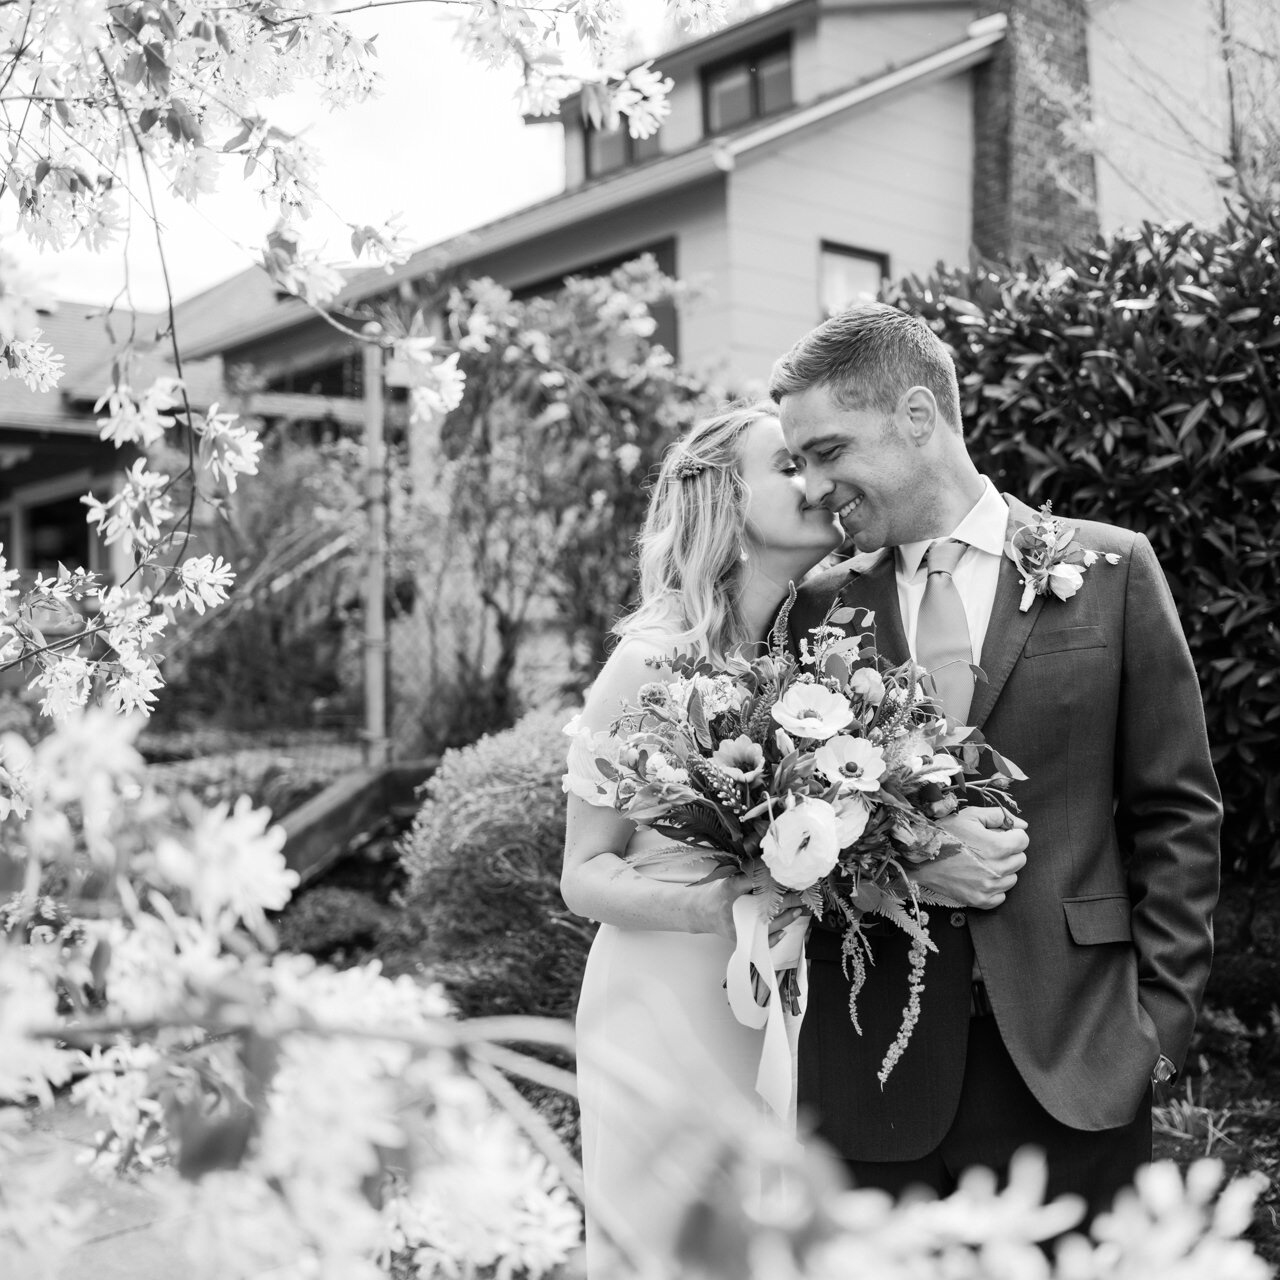  Square portrait of bride kissing groom's cheek in black and white 